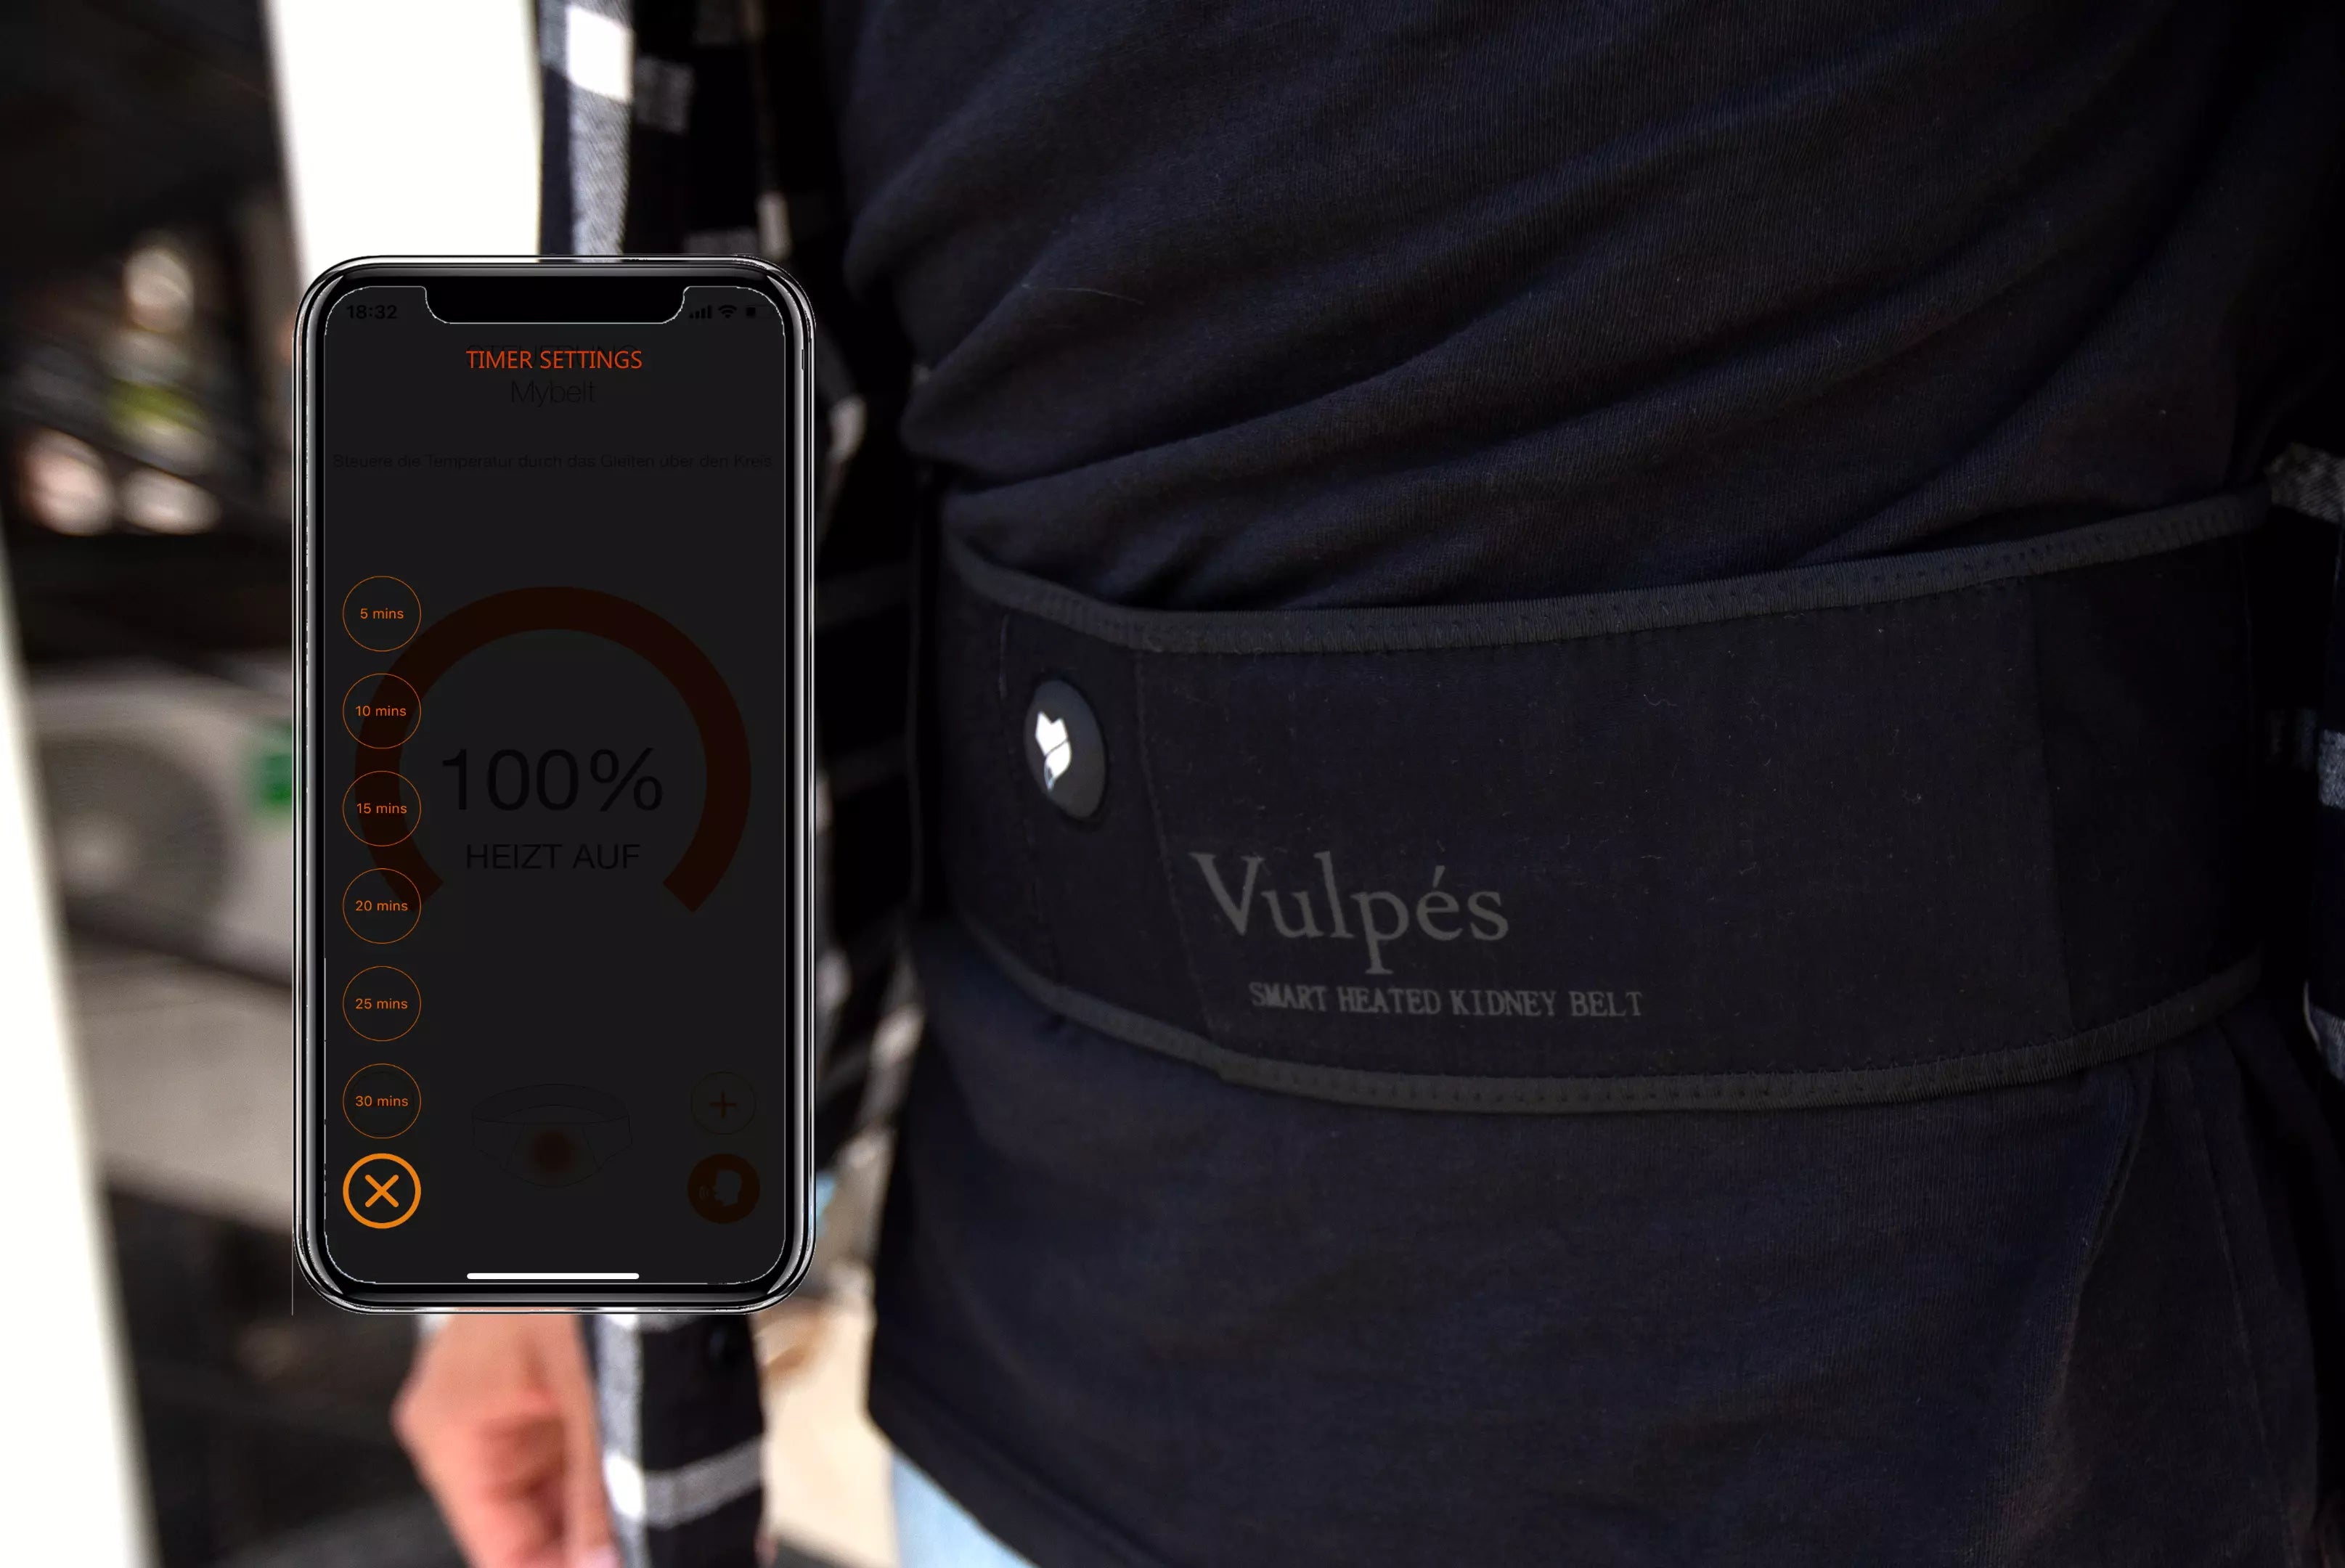 Vulpes Smart Heated Belt - Timer to schedule therapy